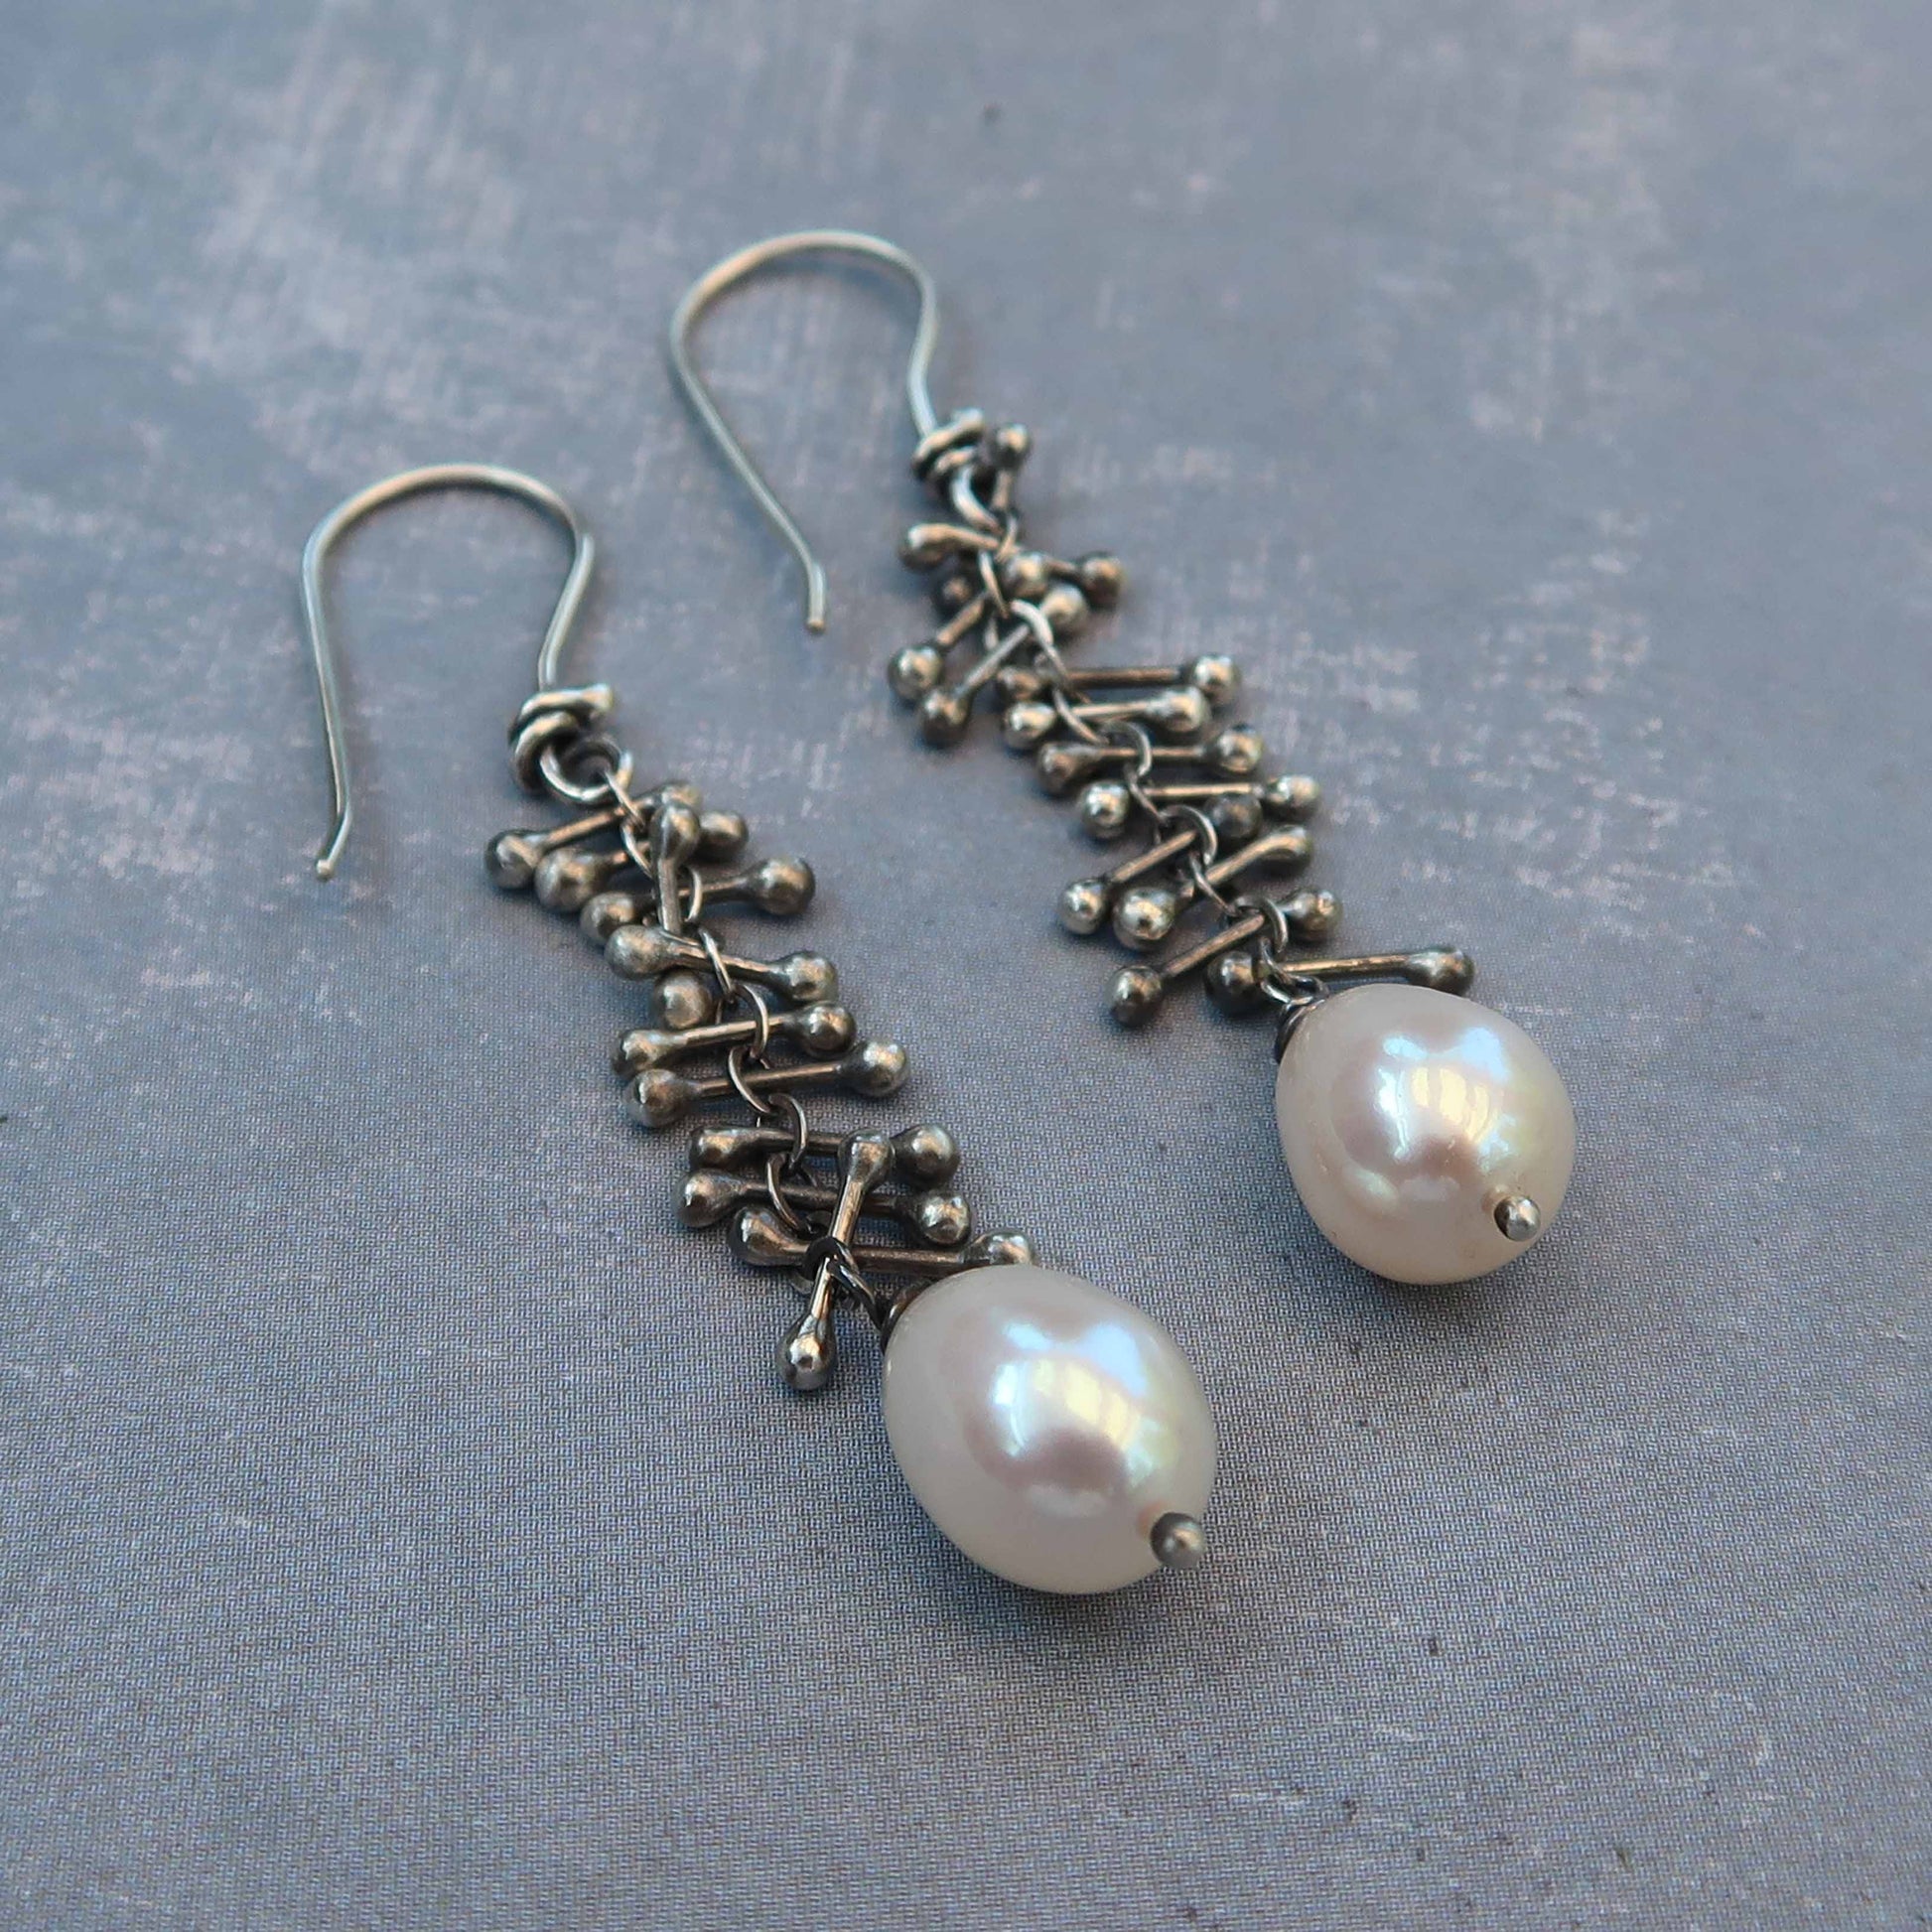 Sterling silver earrings with white pearls